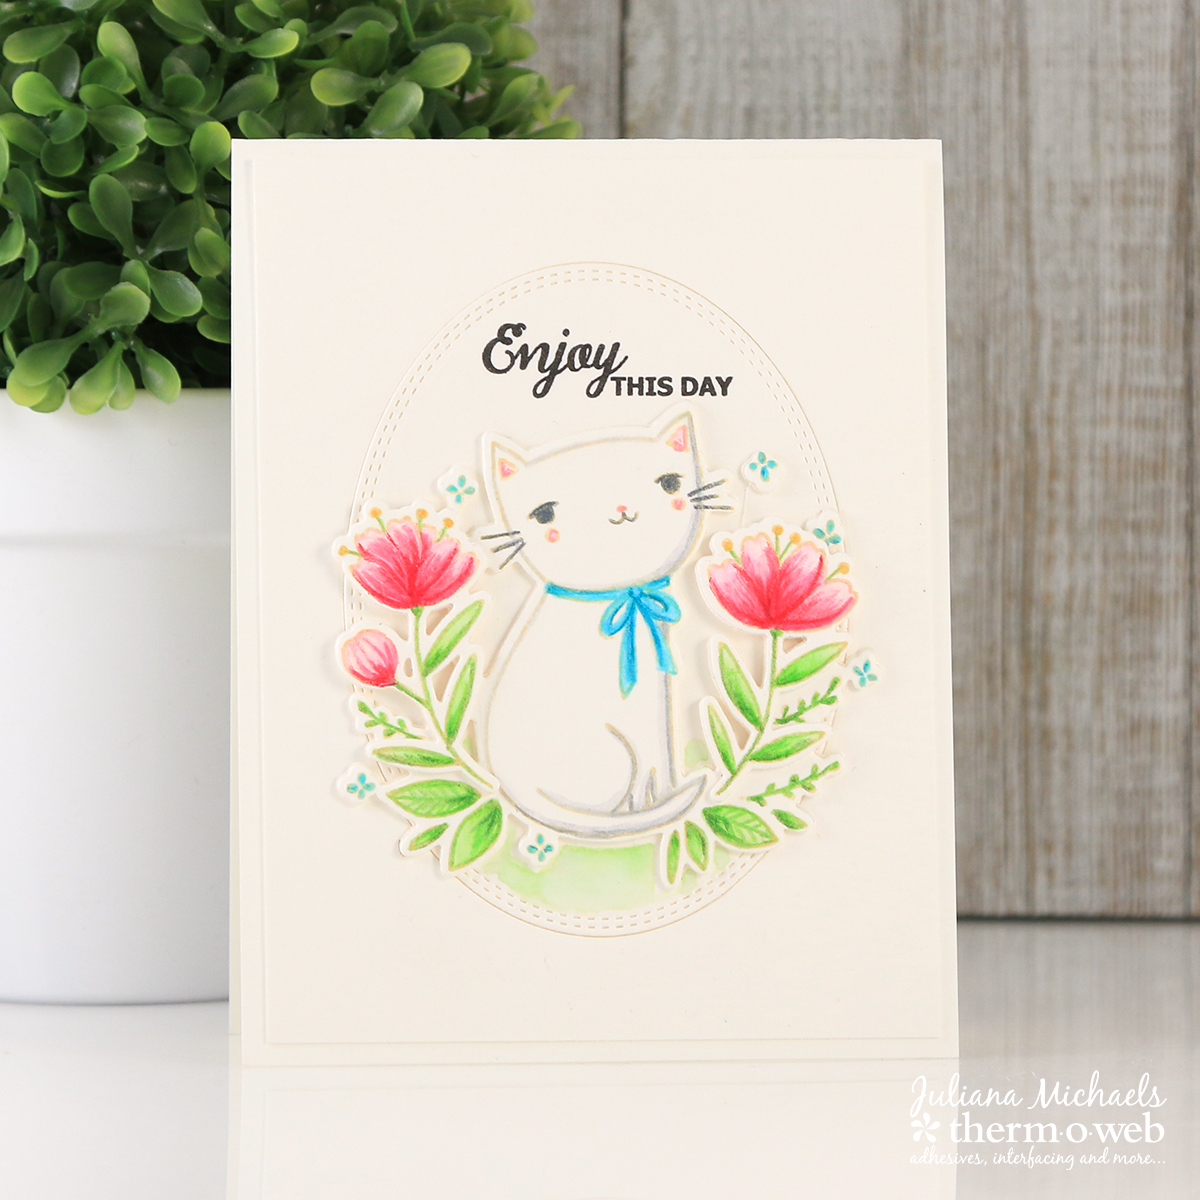 Enjoy Your Day Card with Waffleflower Stamps and Therm O Web Foam Adhesive